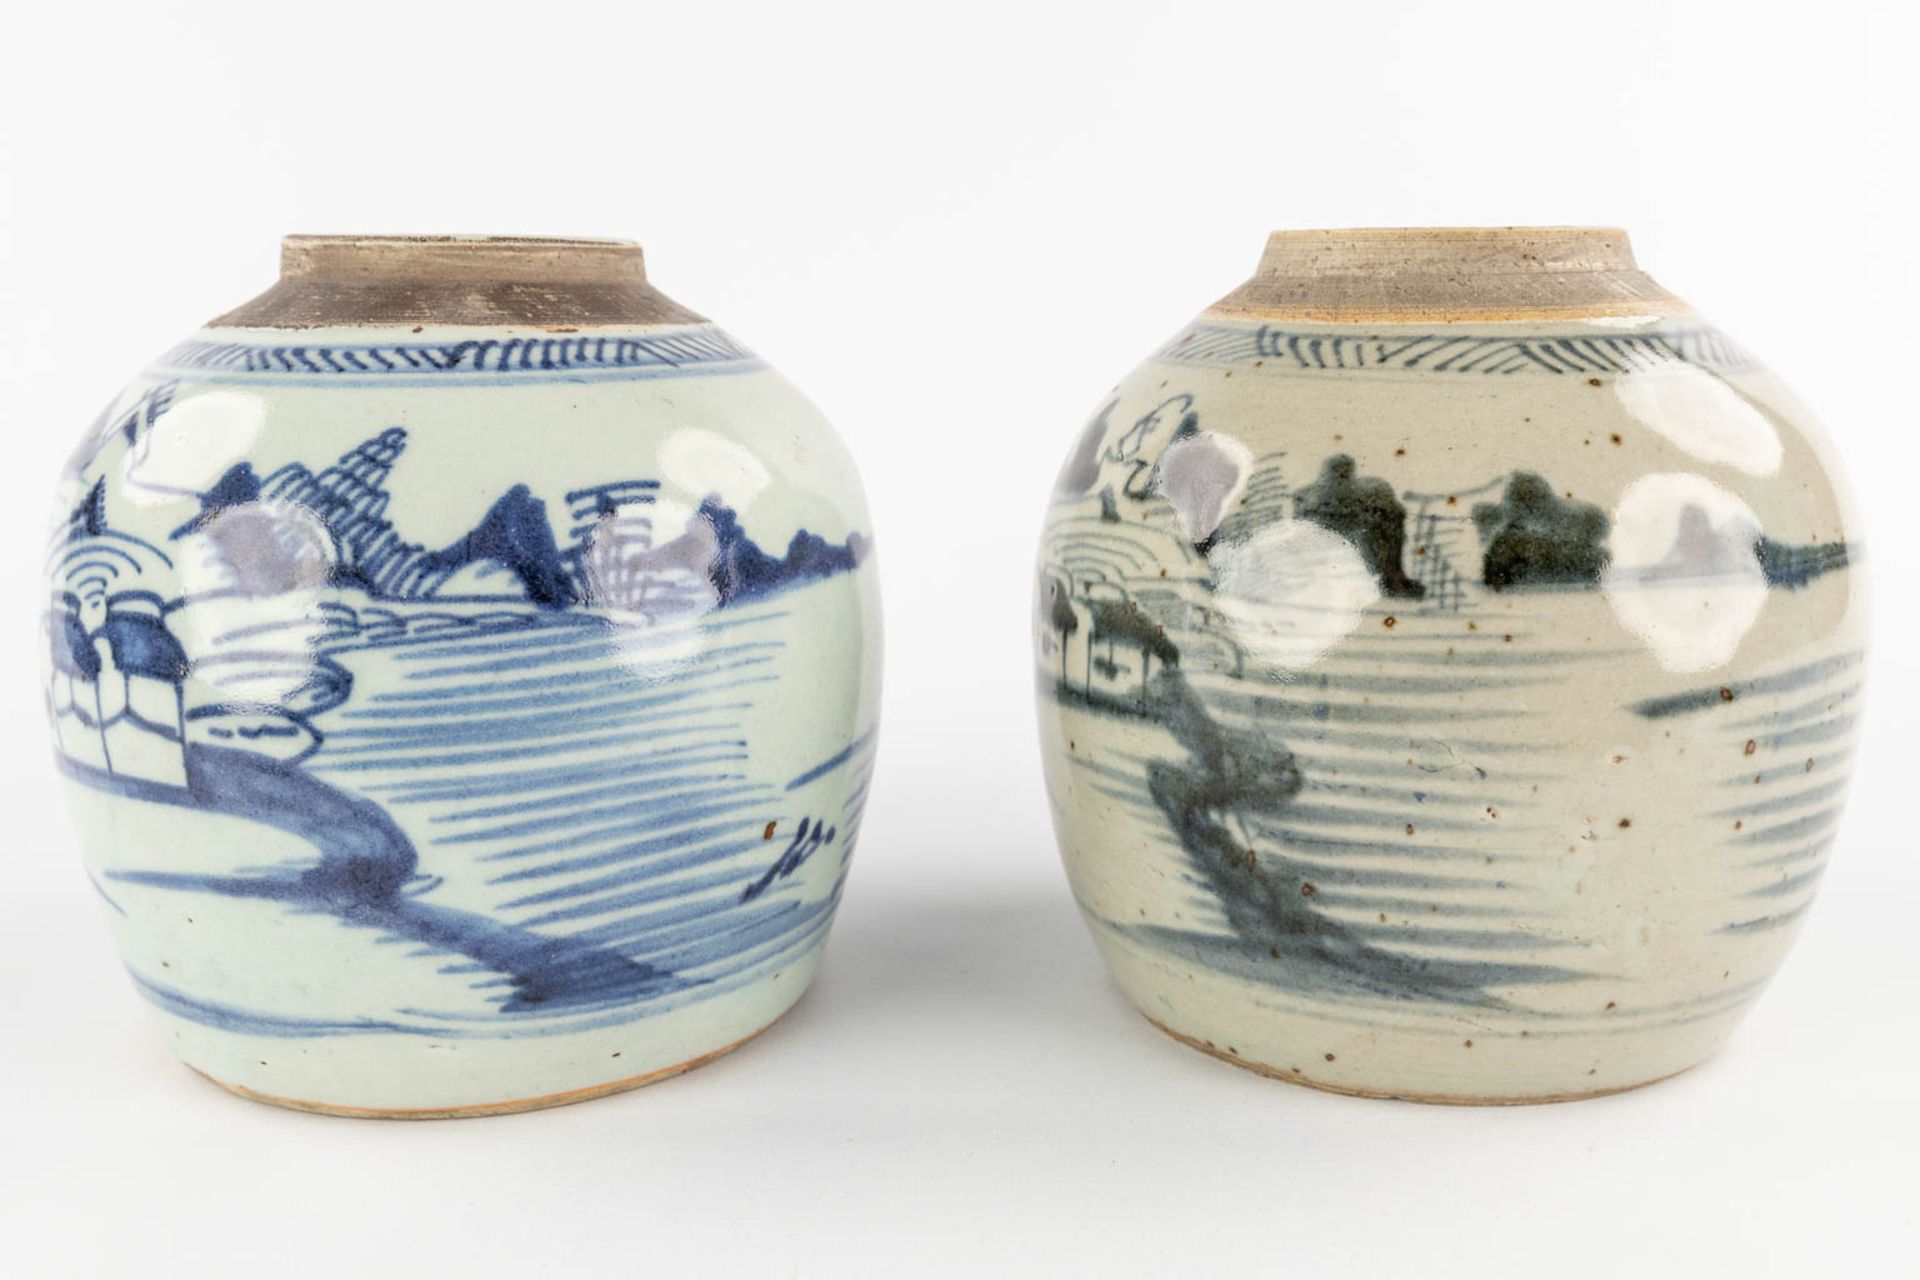 4 Chinese ginger jars with blue-white decor. 19th/20th C. (H:23 x D:21 cm) - Image 12 of 14